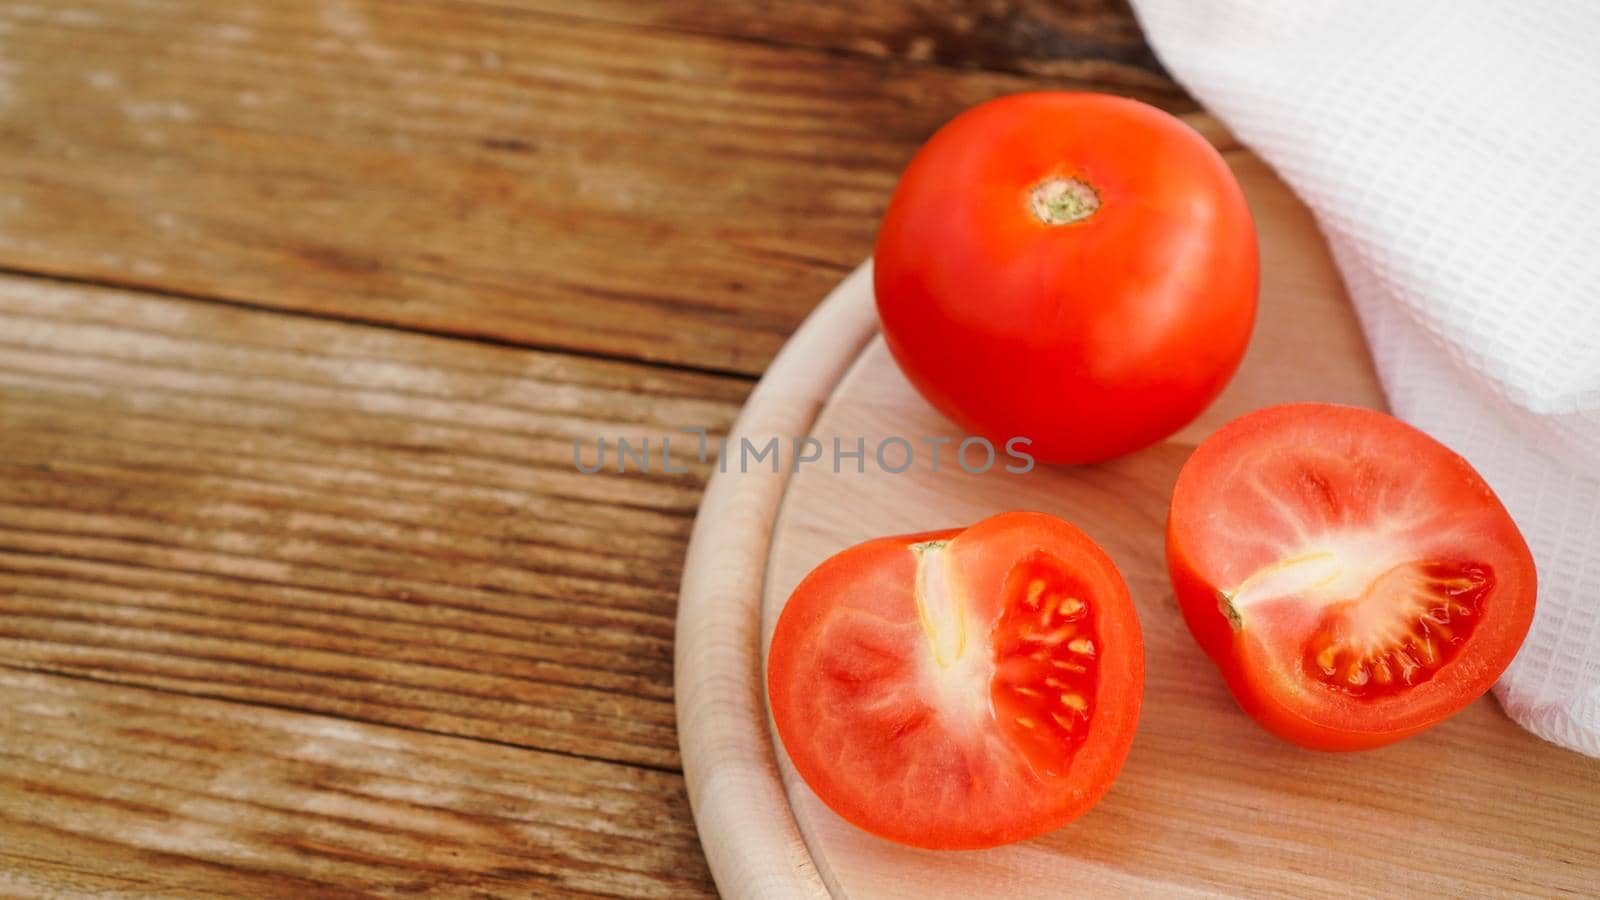 Whole and cut tomato on a wooden board for slicing. Rustic style and wood background. Vegetables and healthy eating. Ingredients for tomato juice